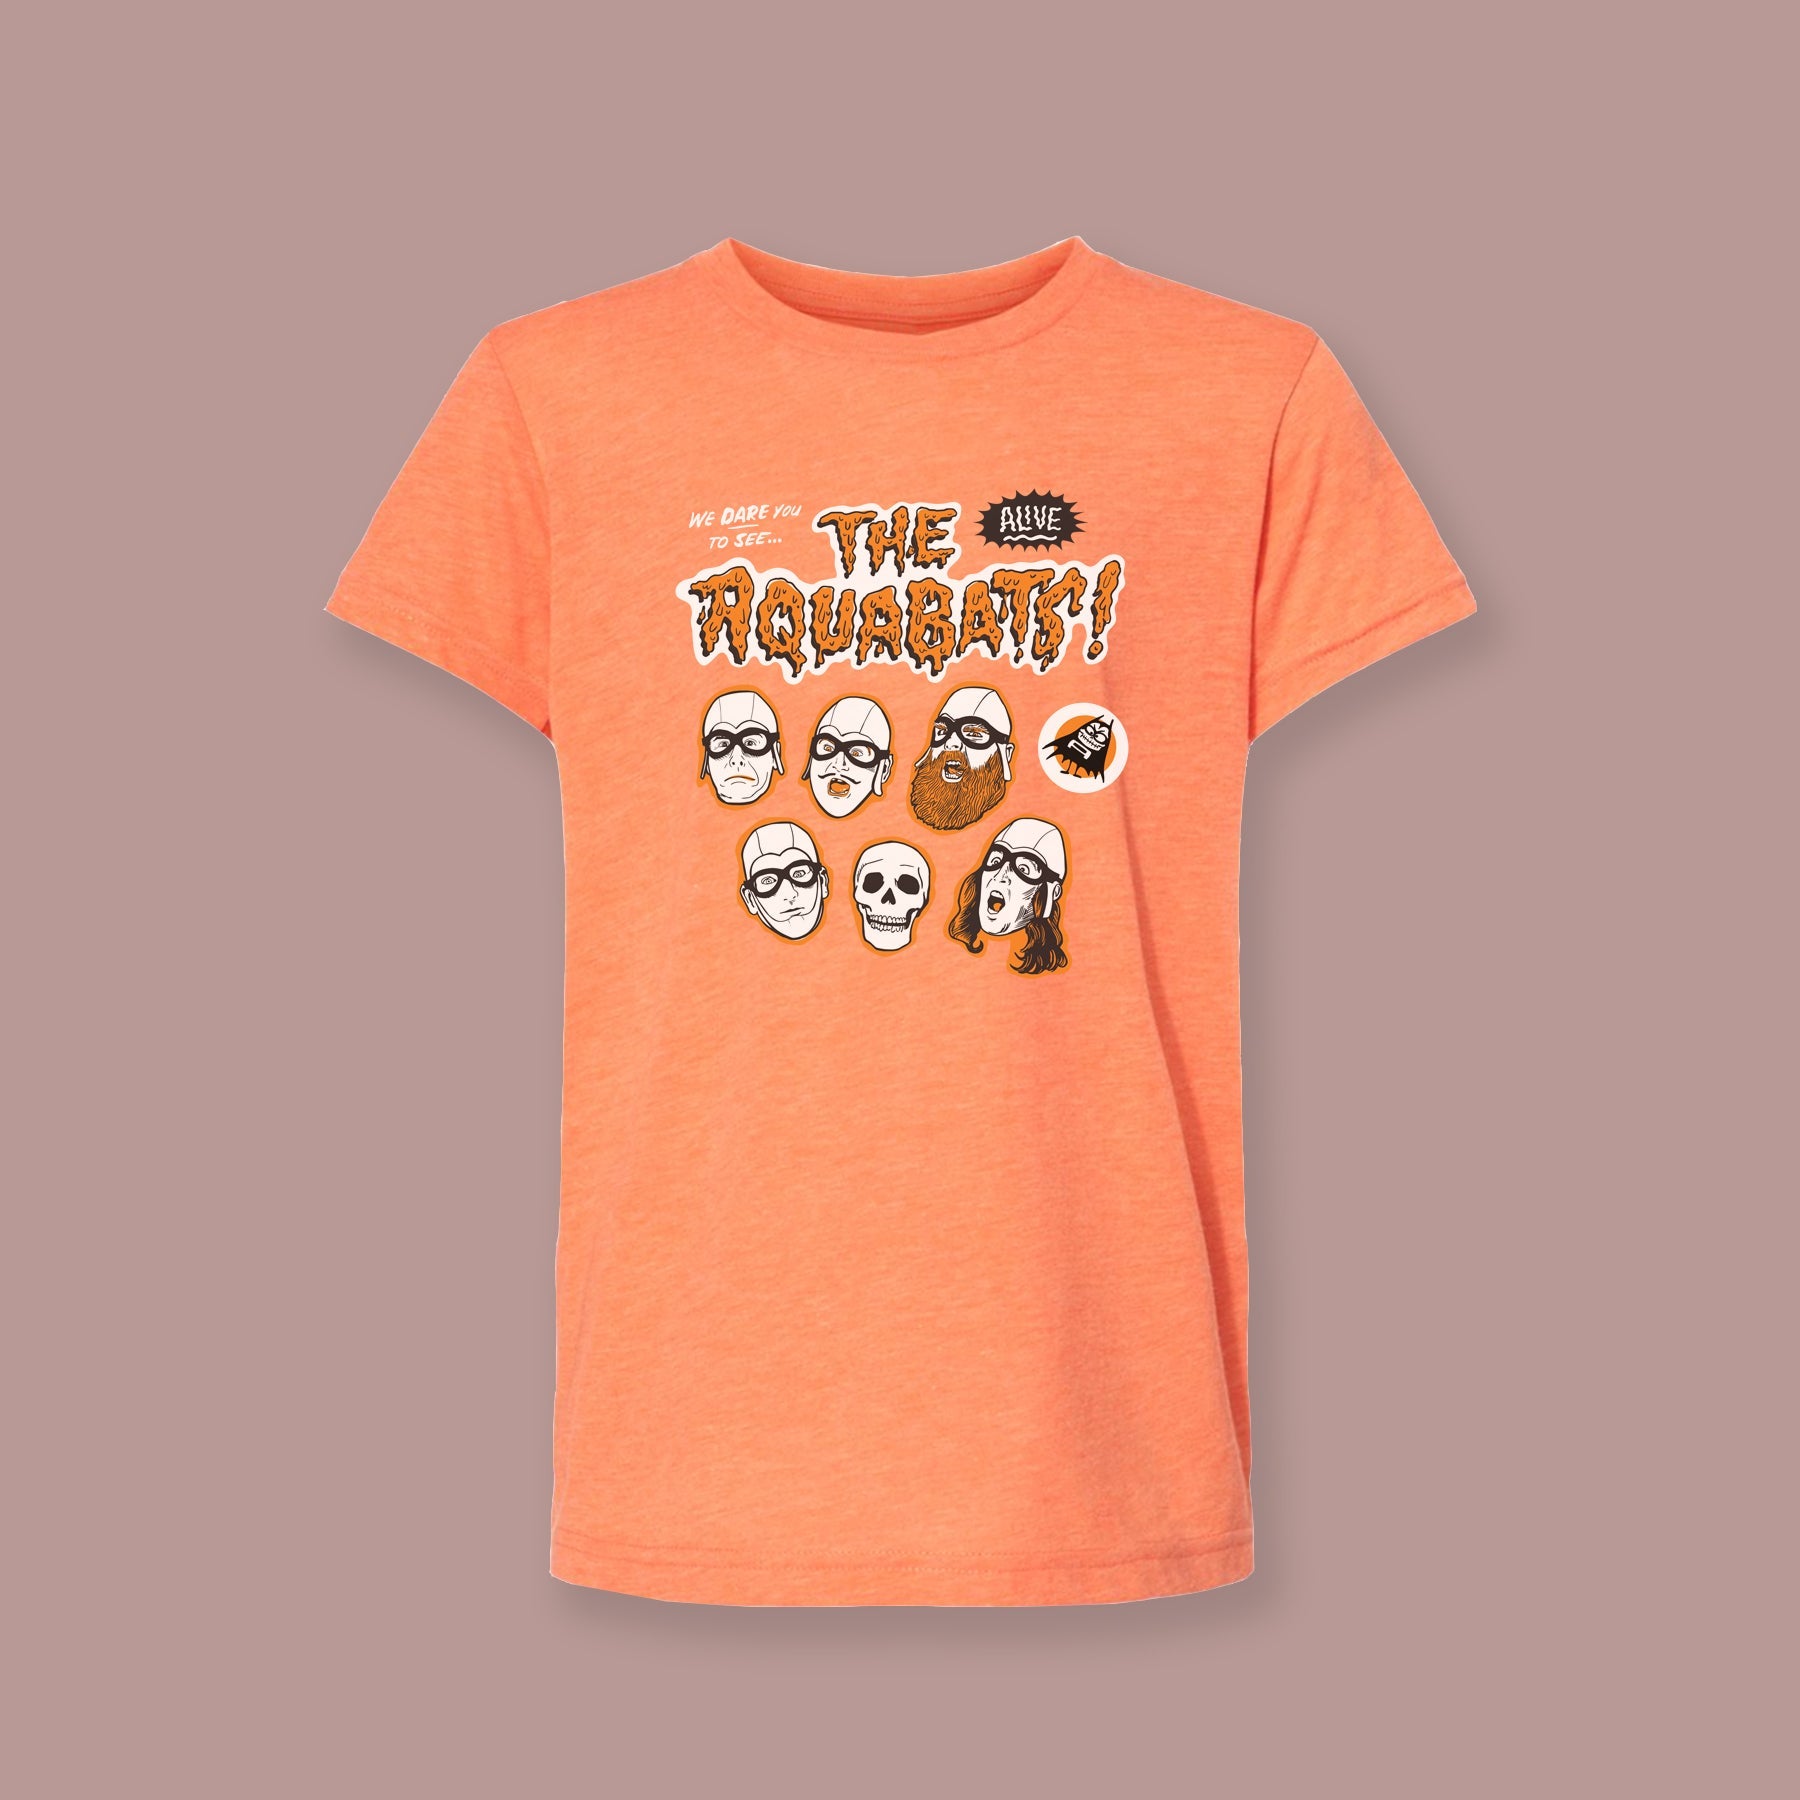 The Aquabats! In GLOOPYVISION! Tees for Kids!